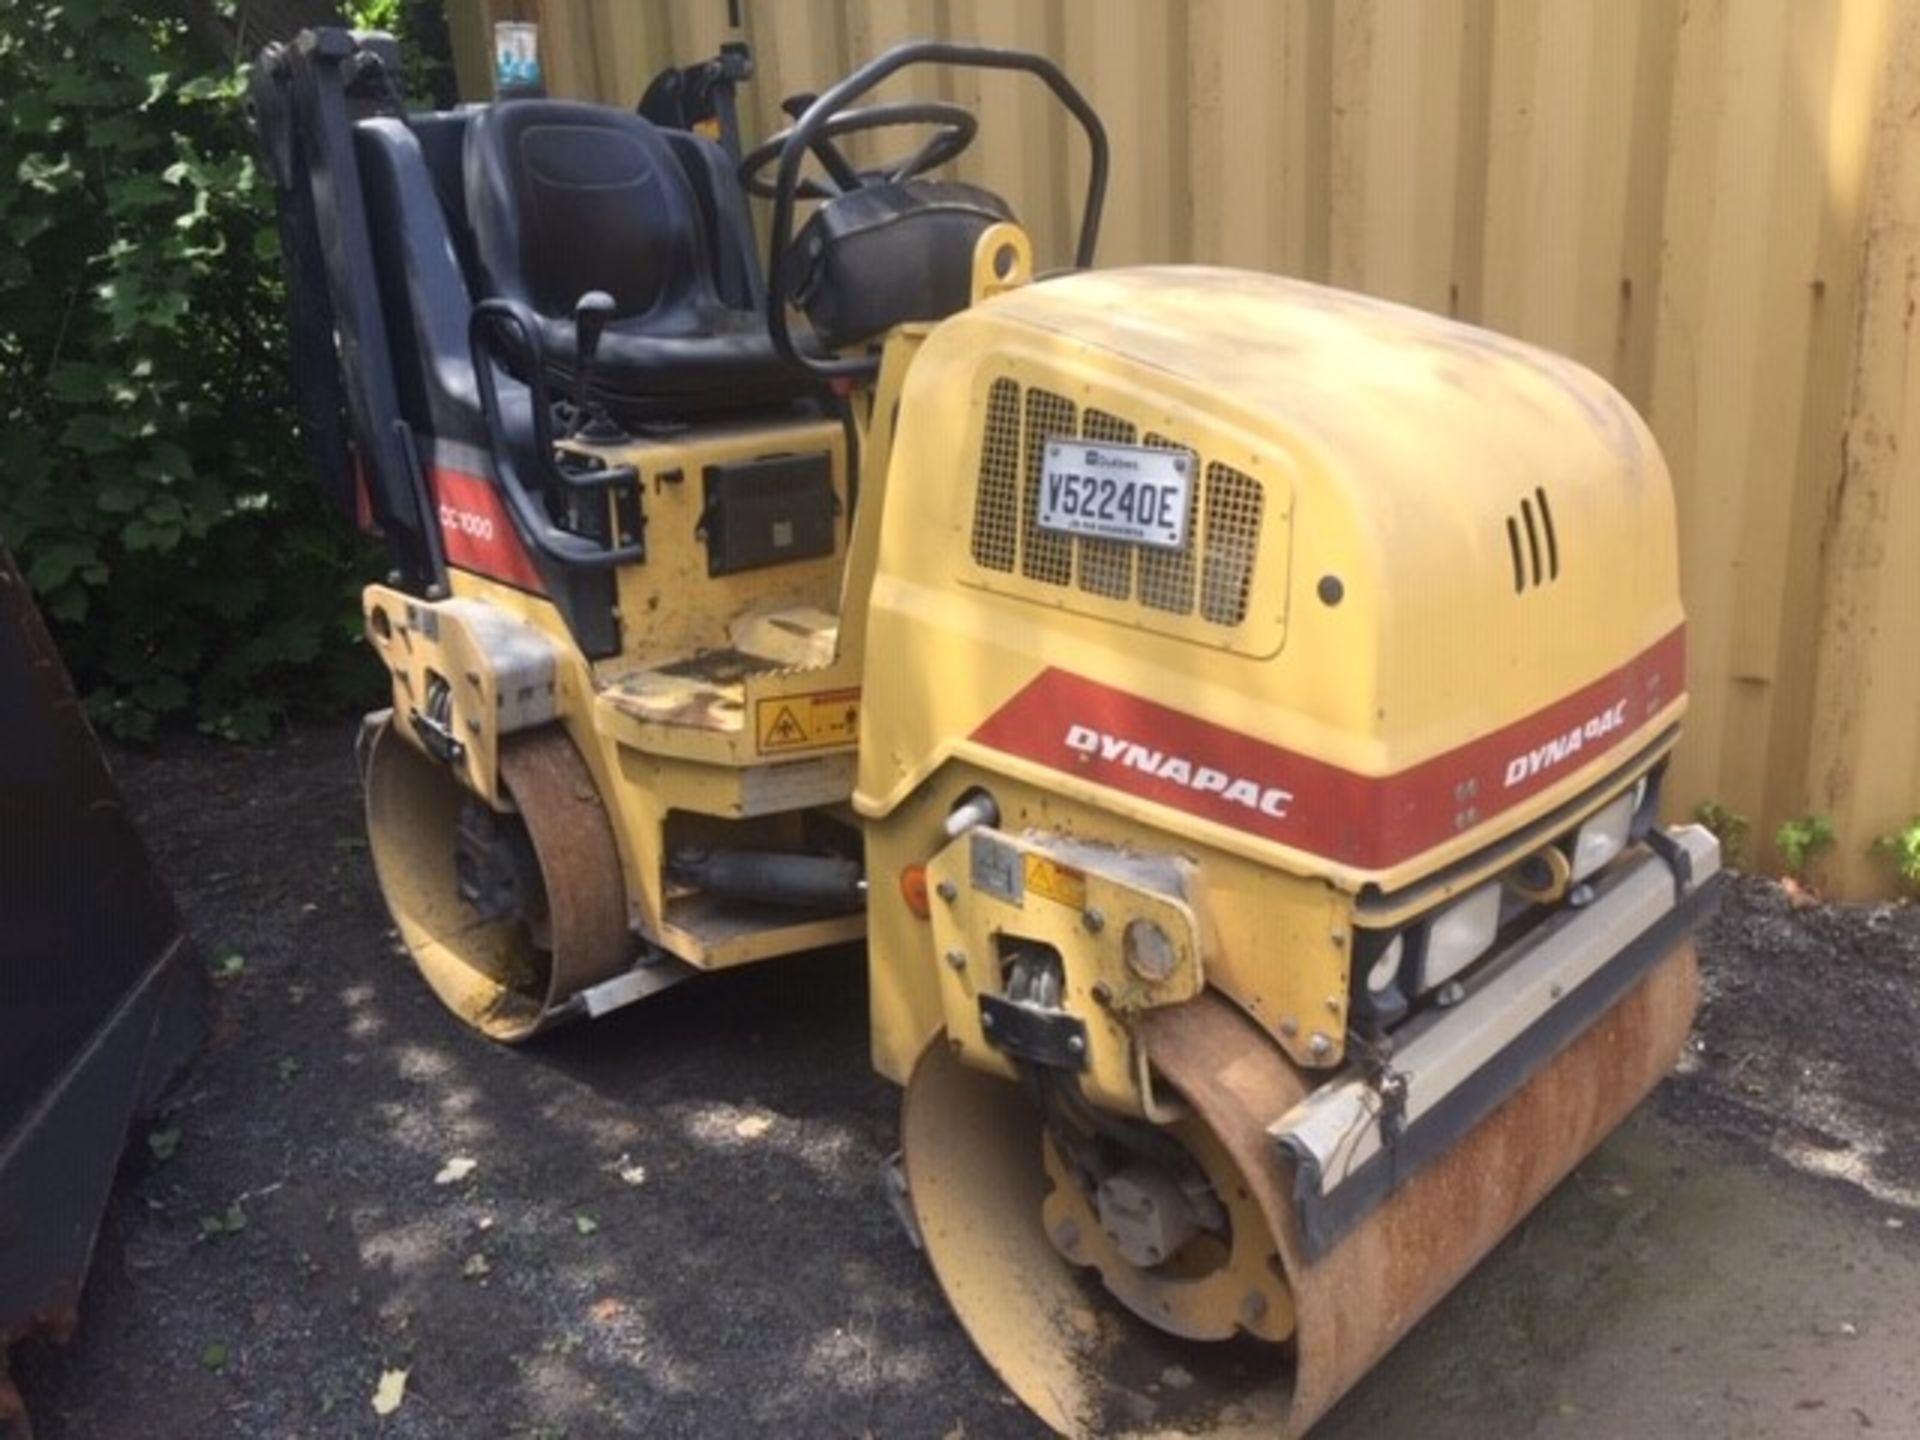 DYNAPAC Roller/Compactor, mod: CC10000, 2010 (see photos for details)